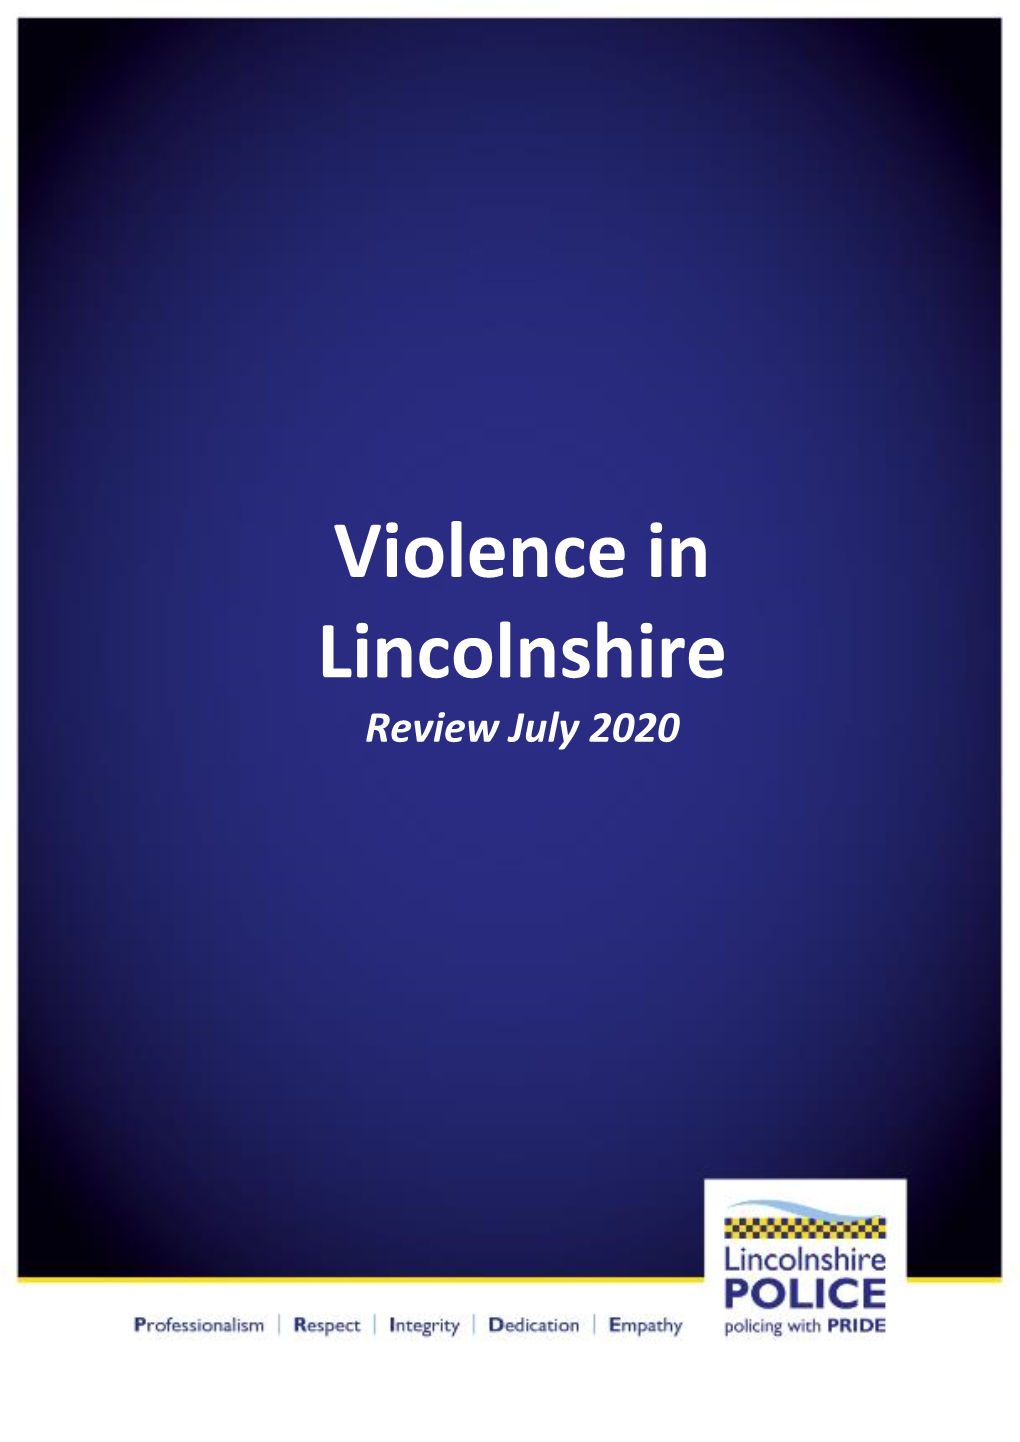 Violence in Lincolnshire July 2020